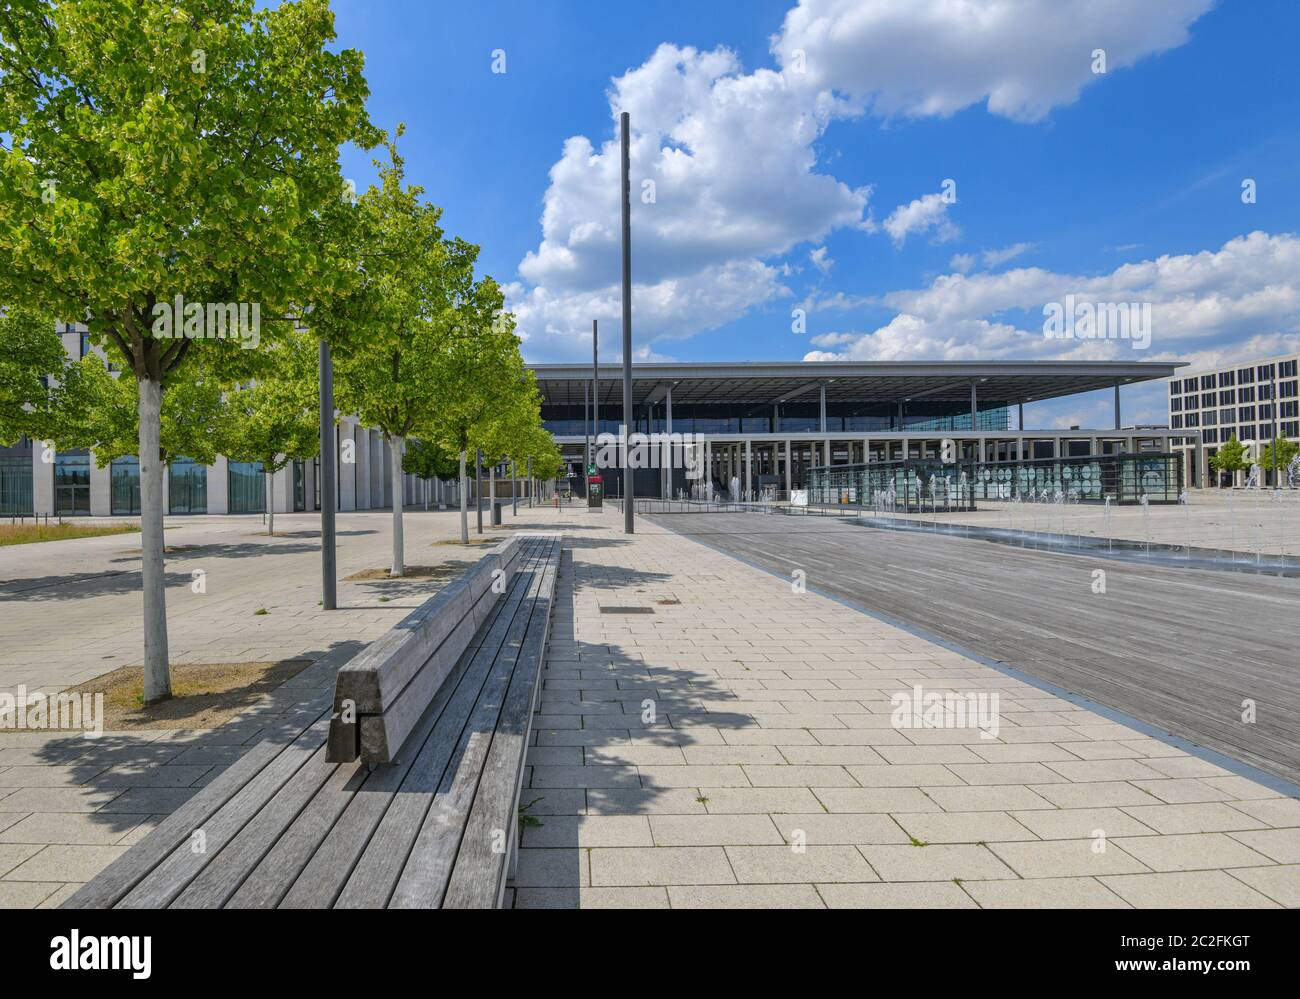 17 June 2020, Brandenburg, Schönefeld: Linden trees stand in front of the terminal of the capital airport Berlin Brandenburg Willy Brandt (BER). According to the operator, there is nothing to stop the planned opening of the new Capital Airport BER in October 2020. After years of delays, BER is scheduled to start operations at the end of October 2020. The operating company is owned by the states of Berlin and Brandenburg and the federal government. Photo: Patrick Pleul/dpa-Zentralbild/ZB Stock Photo